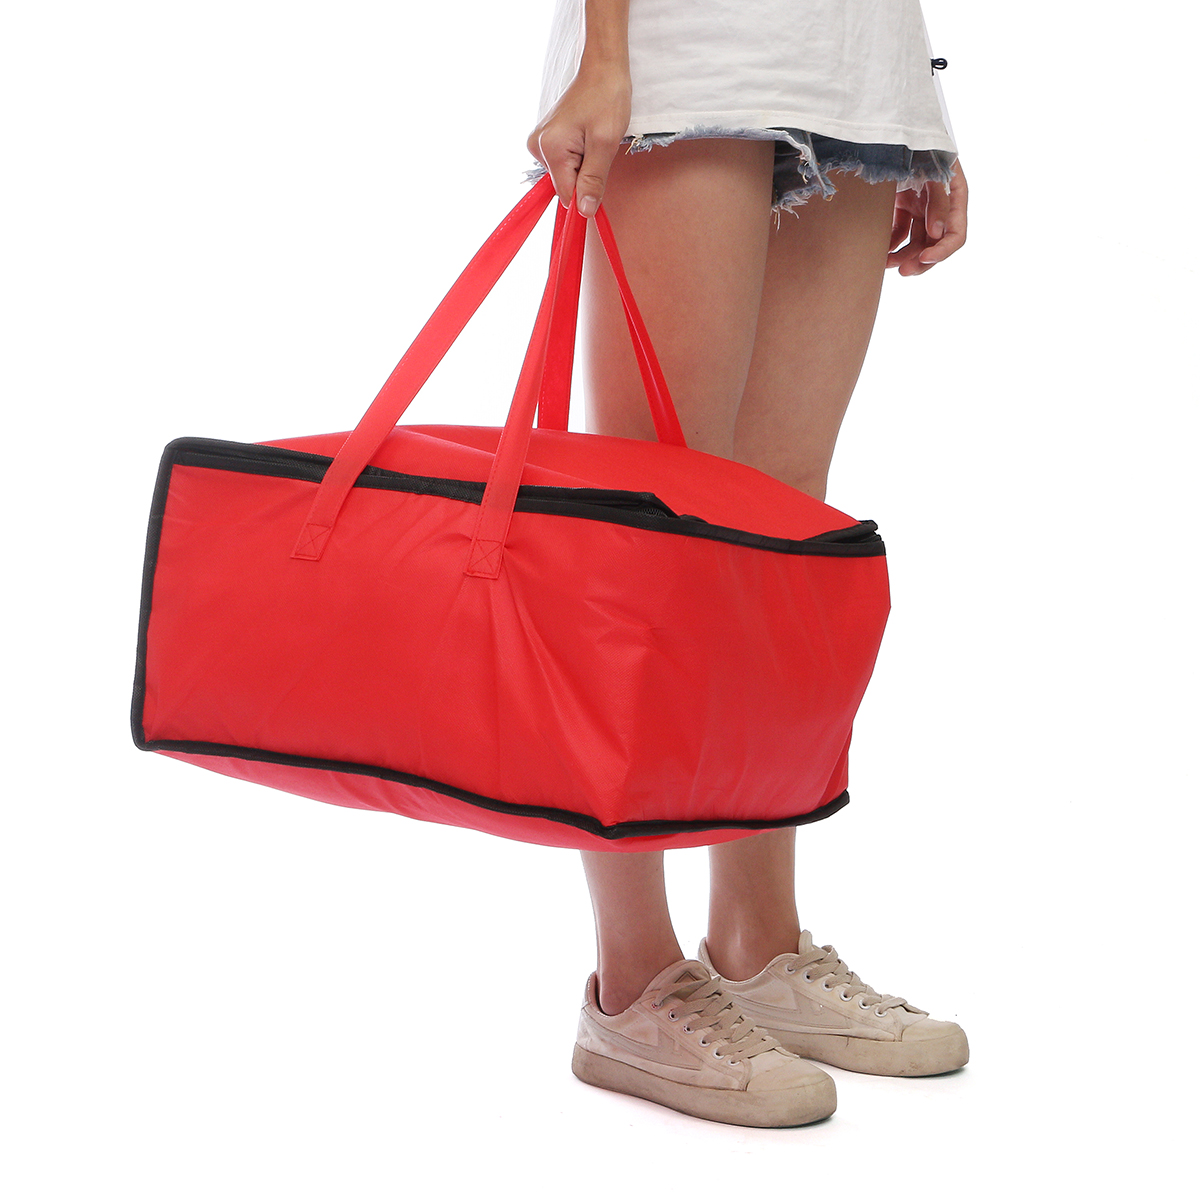 32L-Outdoor-Portable-Picnic-Bag-Insulated-Thermal-Cooler-Bag-Lunch-Food-Pizza-Storage-Bag-1554675-5